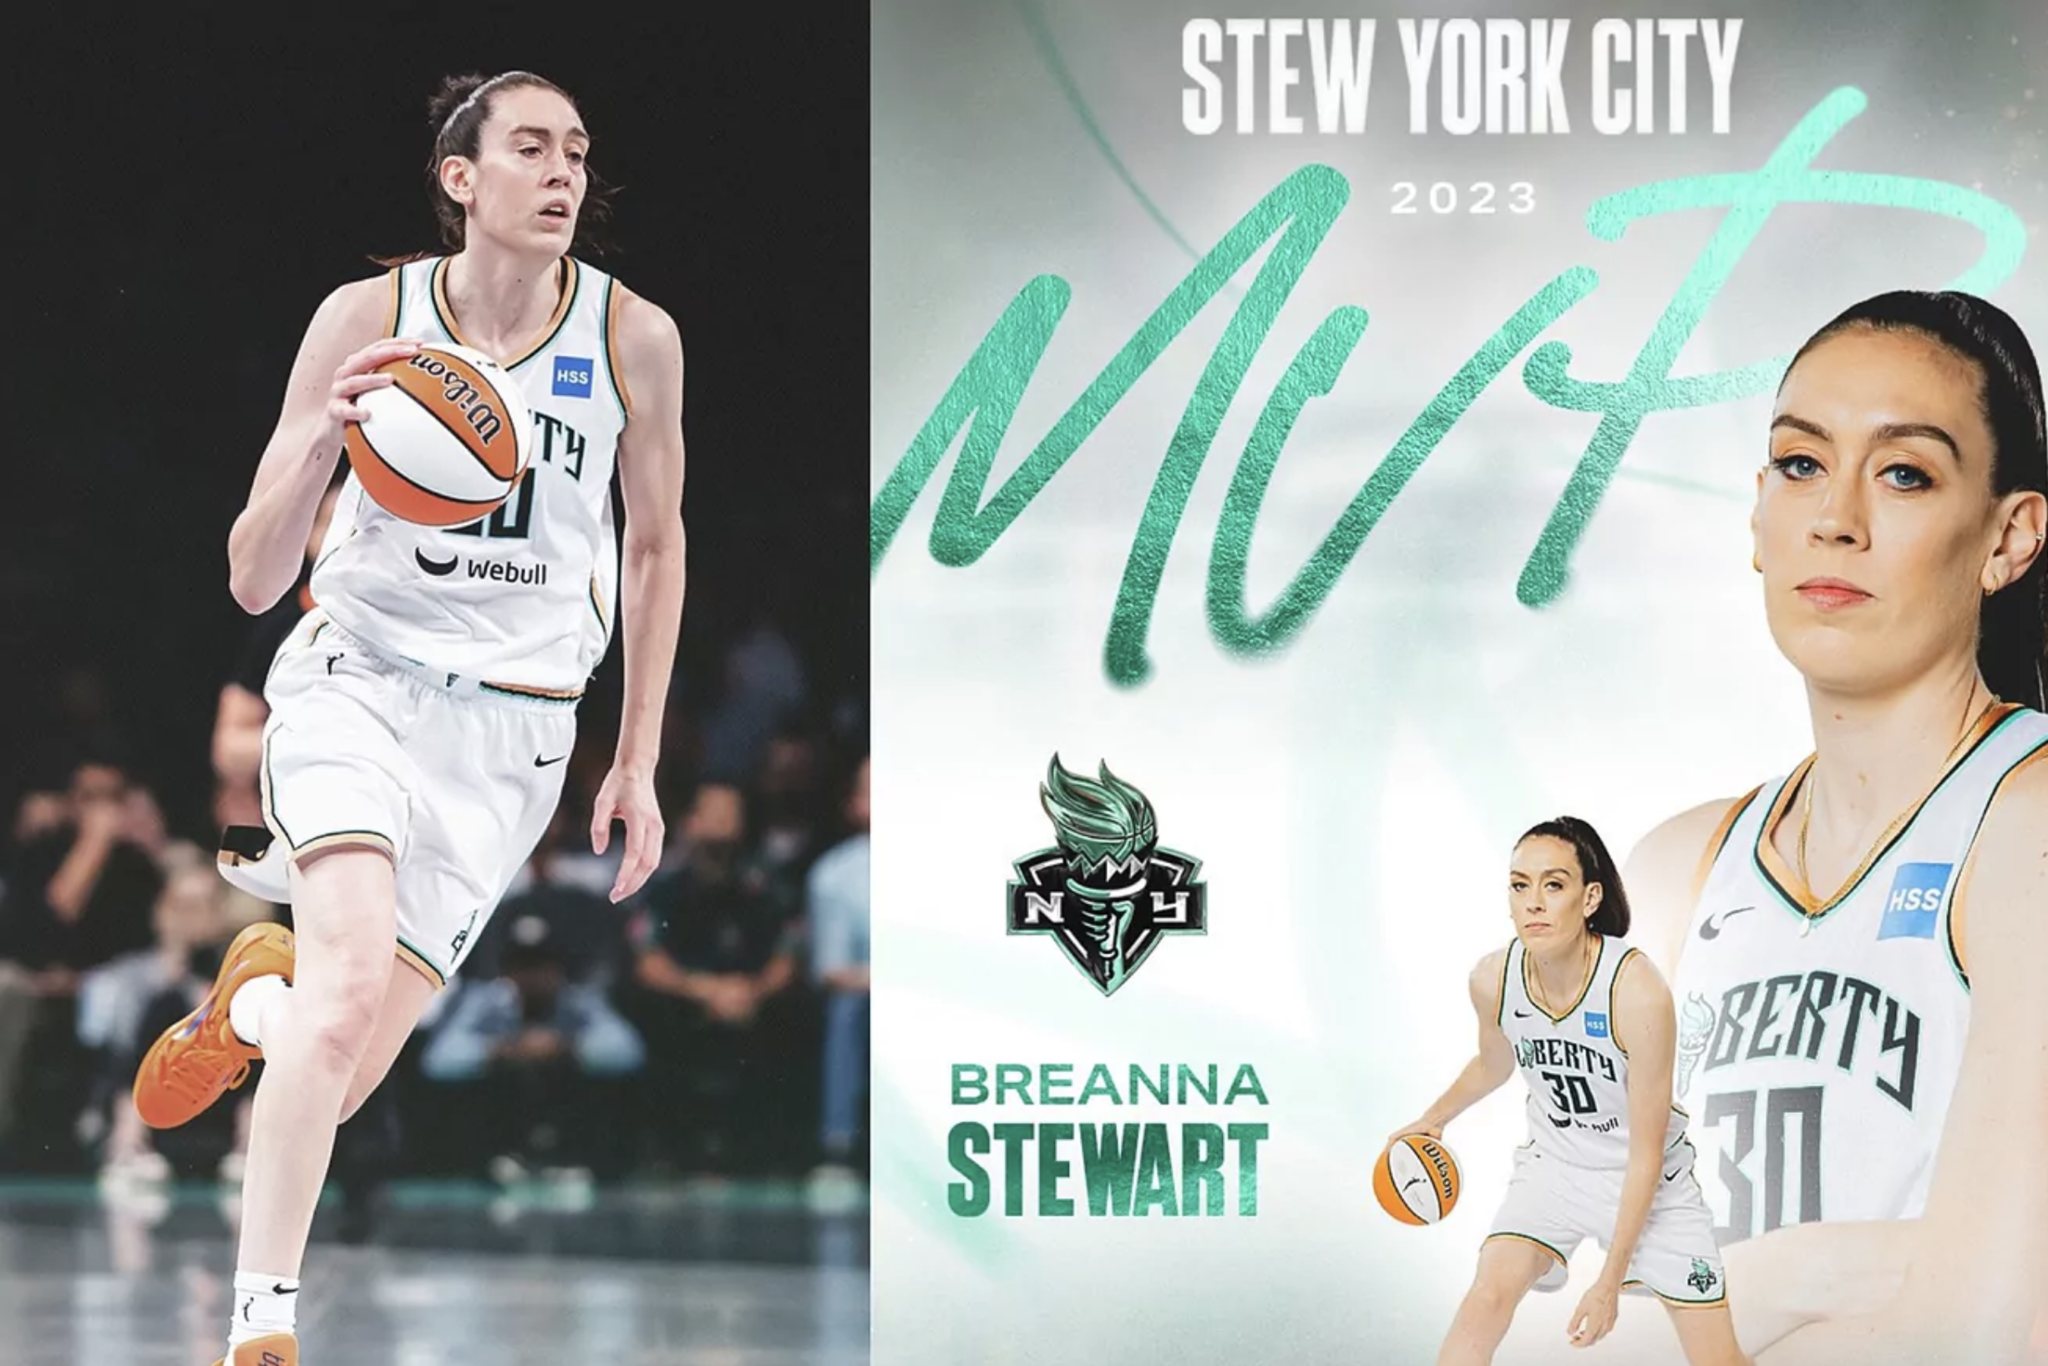 Breanna Stewart named WNBA MVP after setting all-time points record